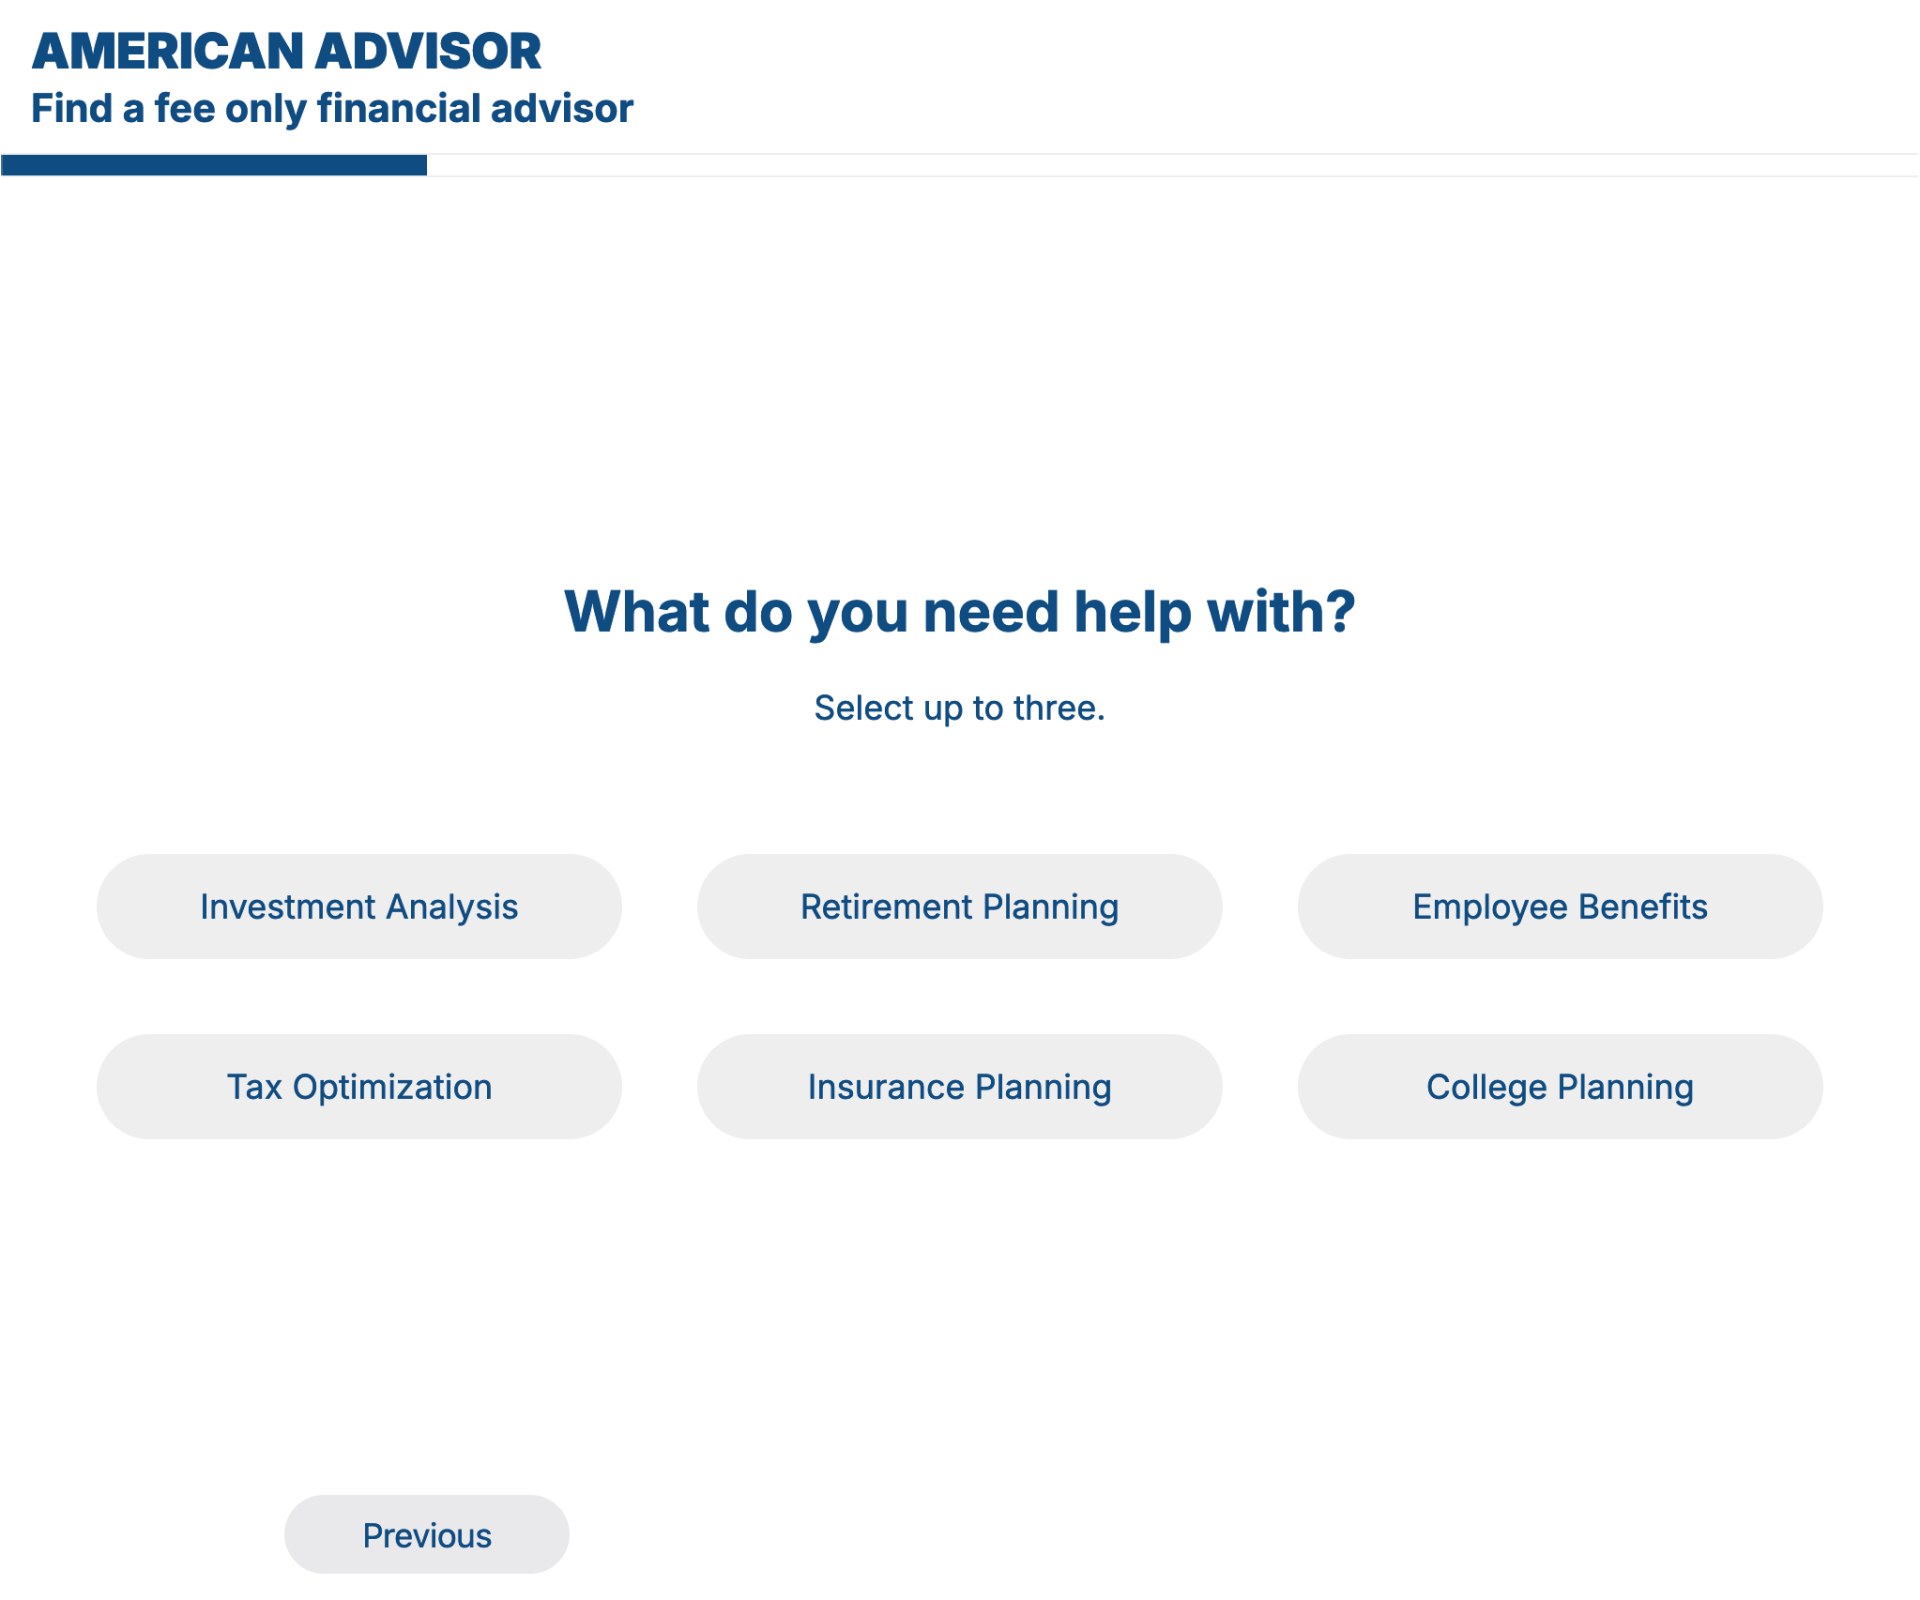 questionnaire asks: What do you need help with? Select up to three. There are six options listed: Investment Analysis, Retirement Planning, Employee Benefits, Tax Optimization, Insurance Planning, College Planning